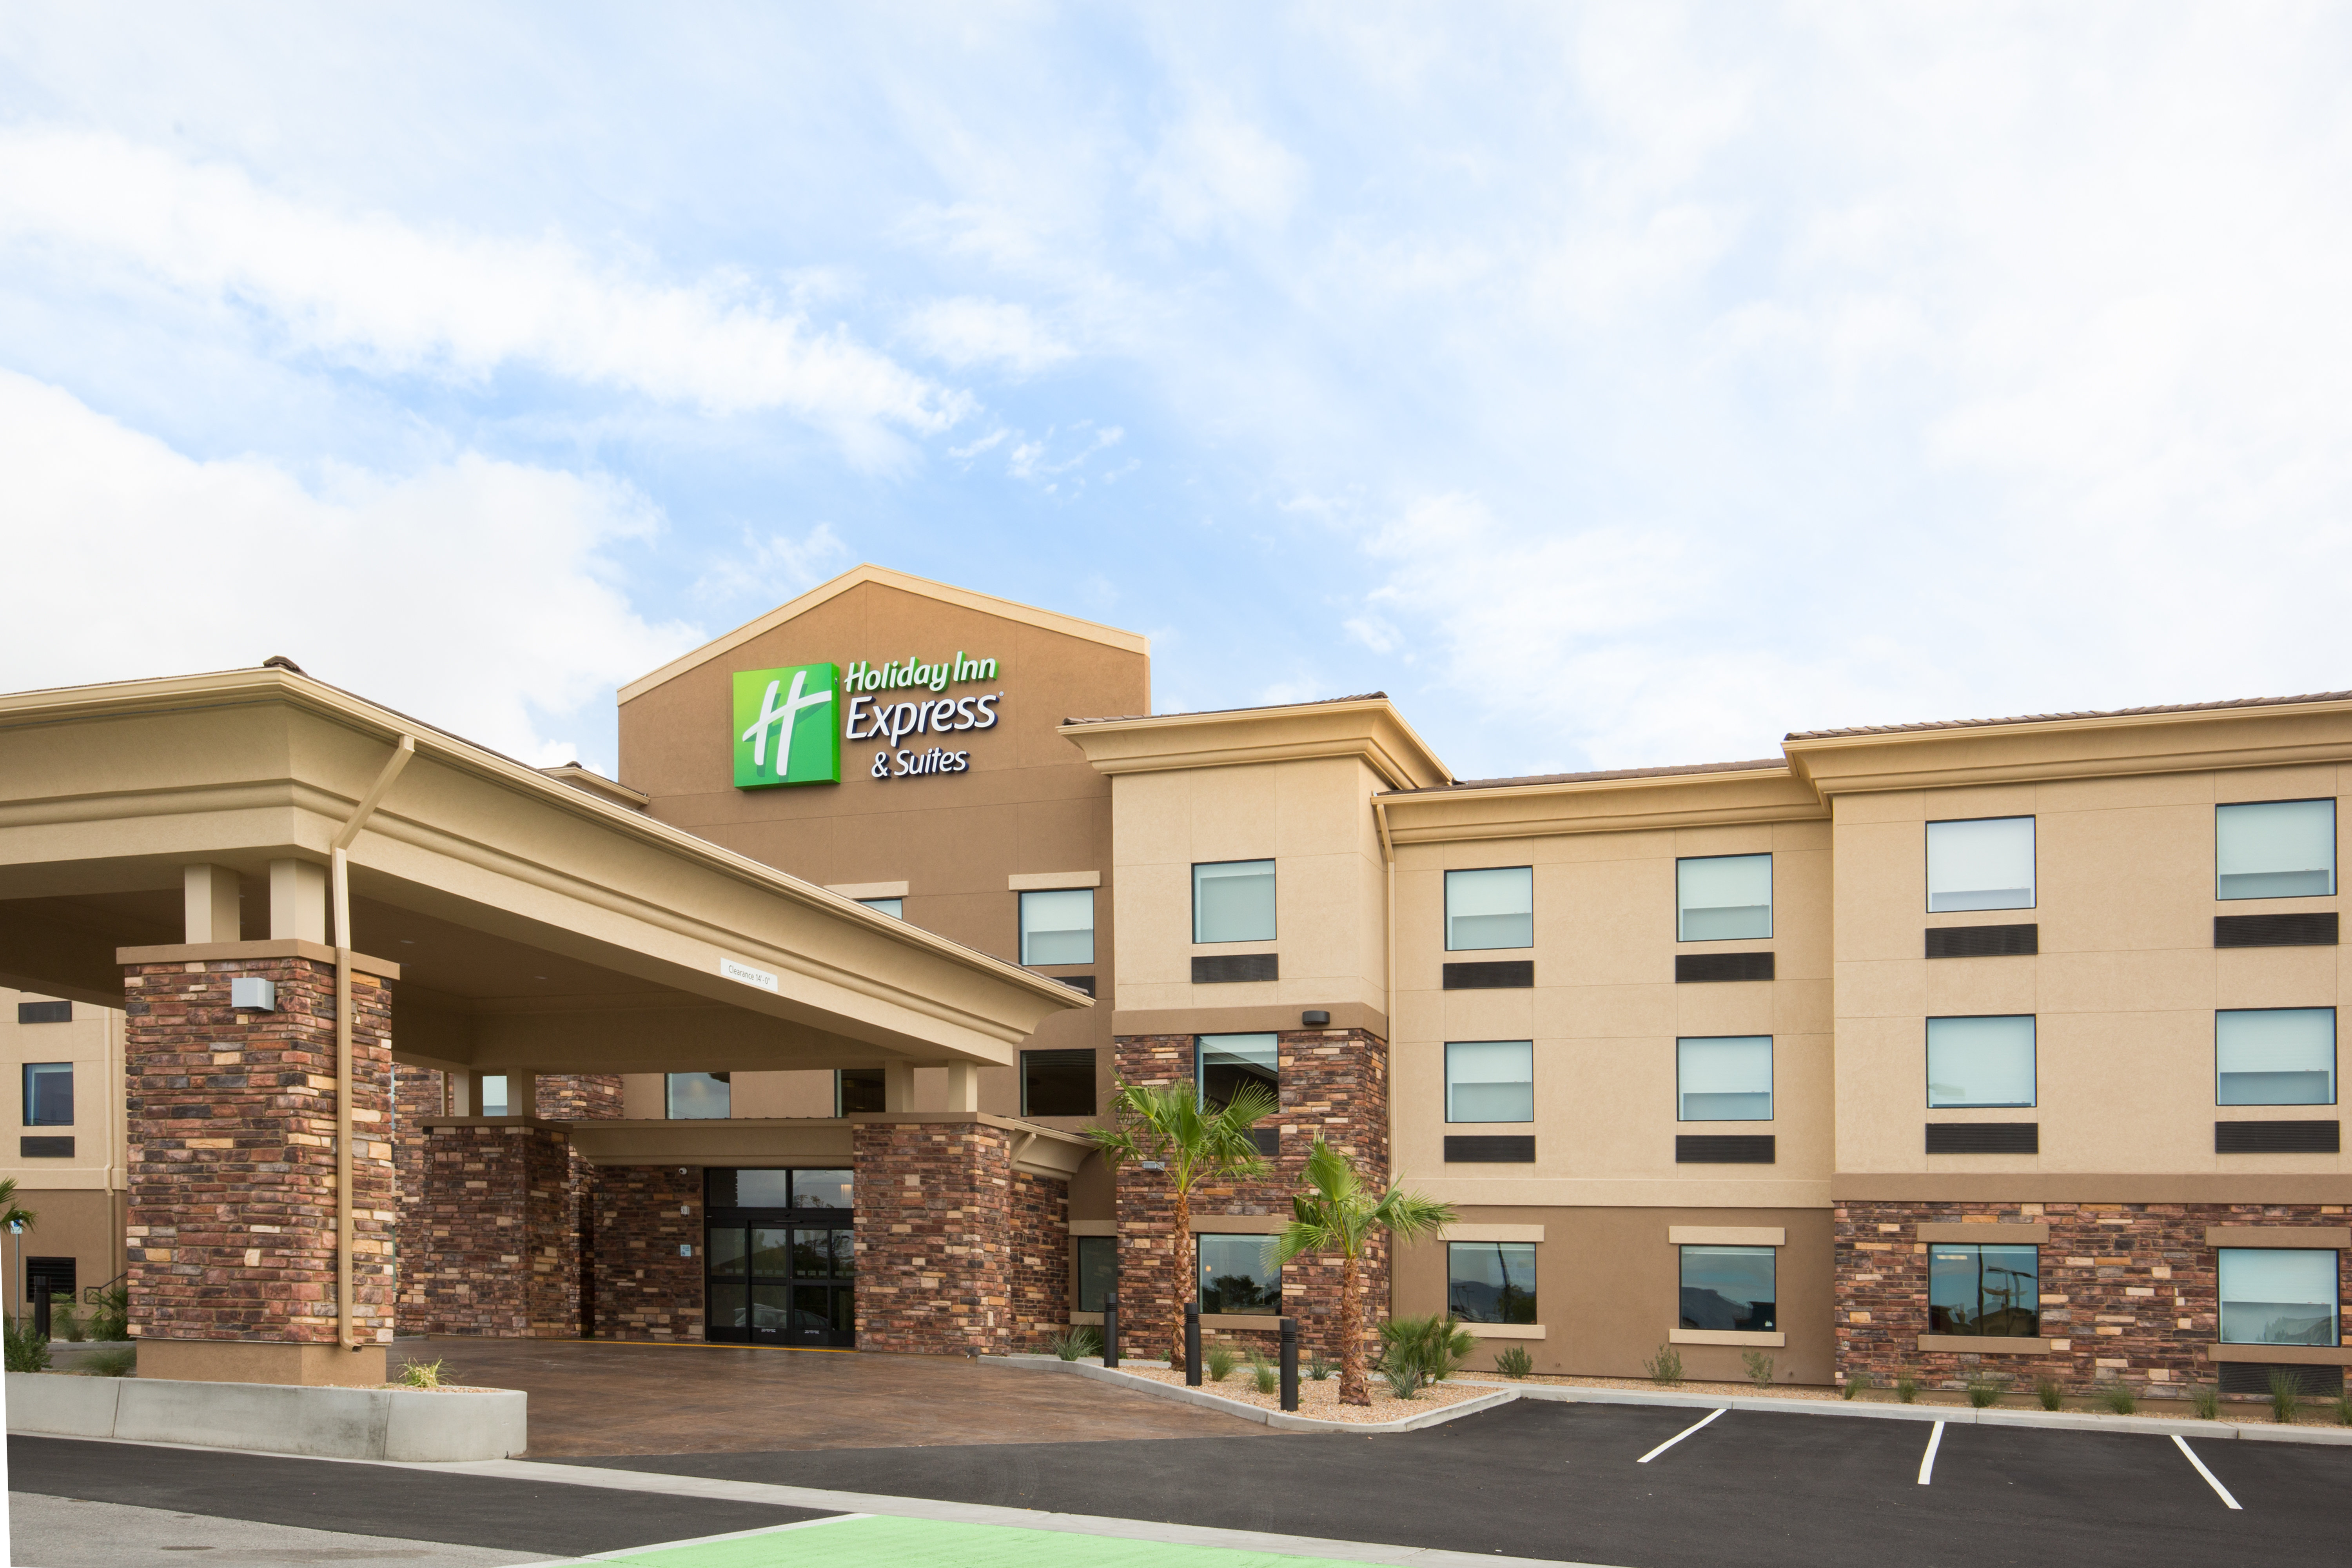 Welcome to the brand new Holiday Inn Express, Pahrump, Nevada